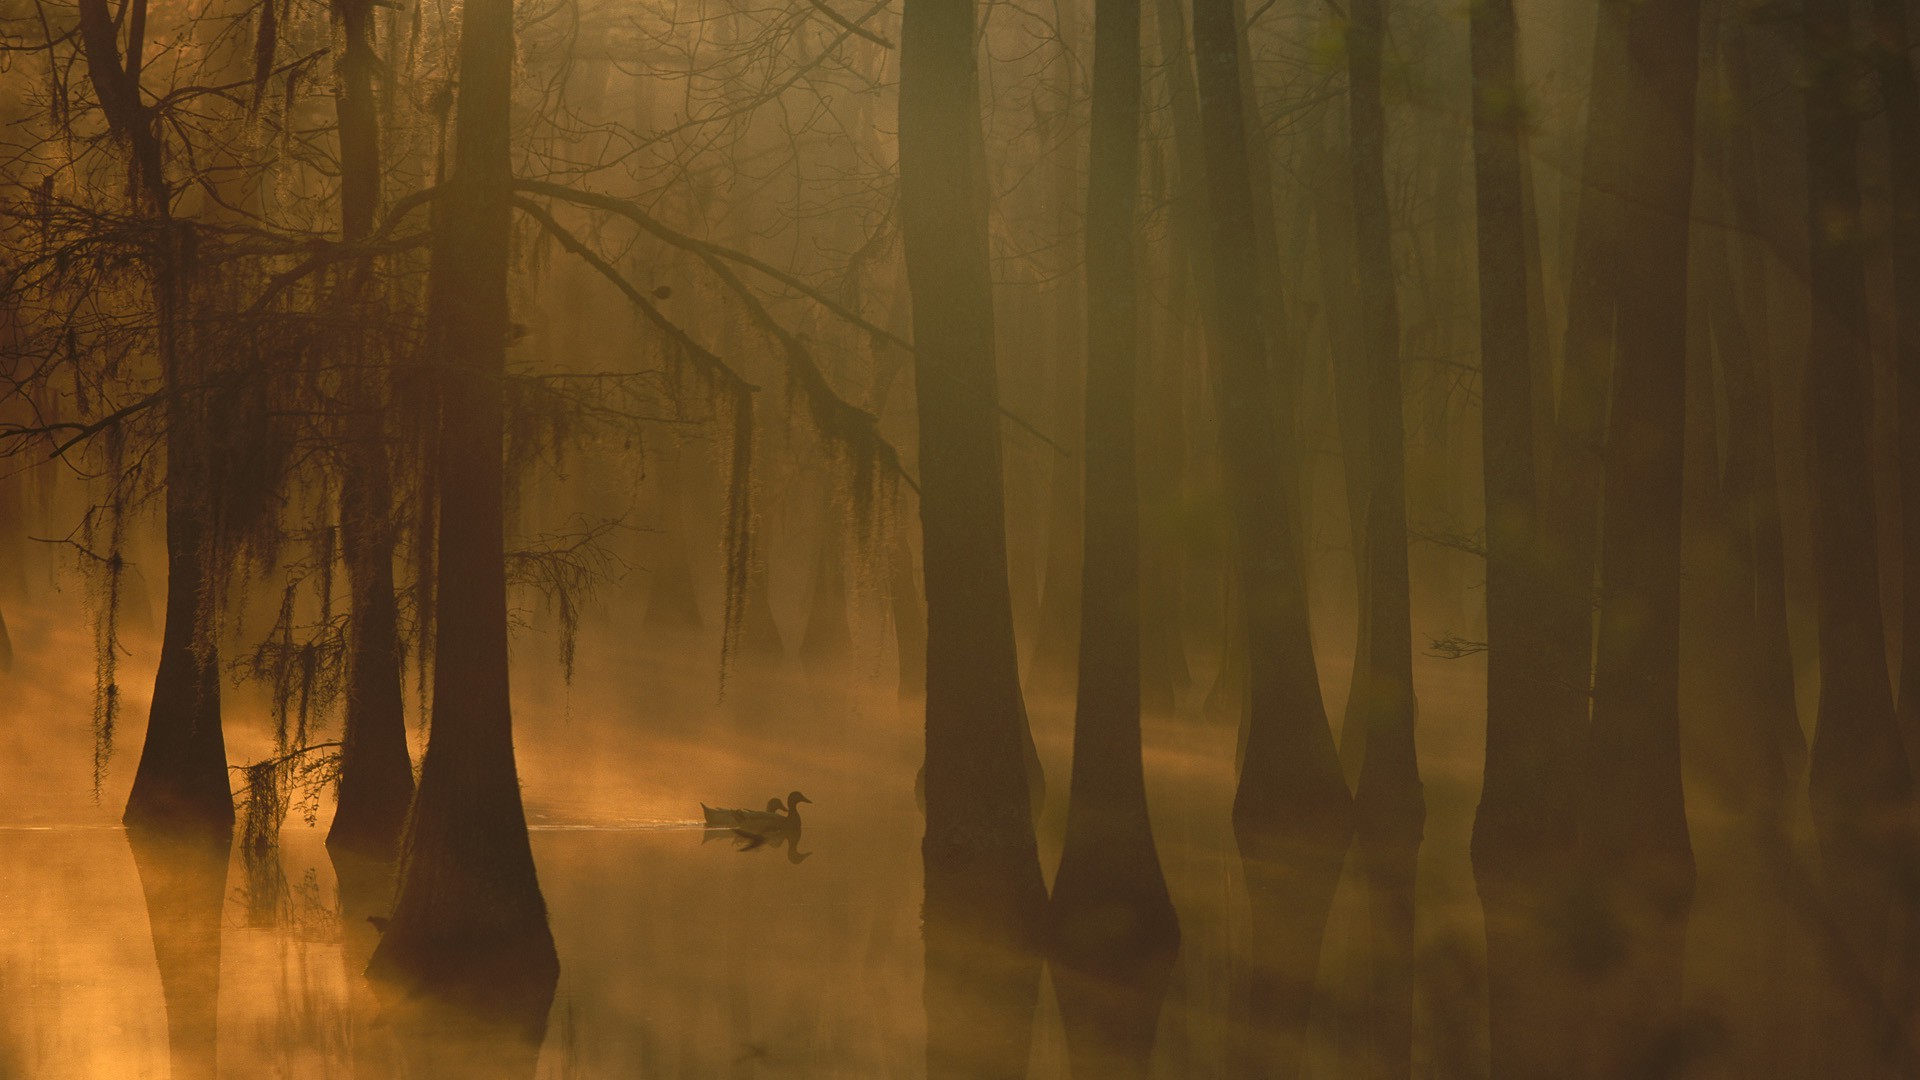 nature, Trees, Forest, Leaves, Water, Lake, Mist, Morning, Birds, Duck, Reflection, Moss, Silhouette Wallpaper